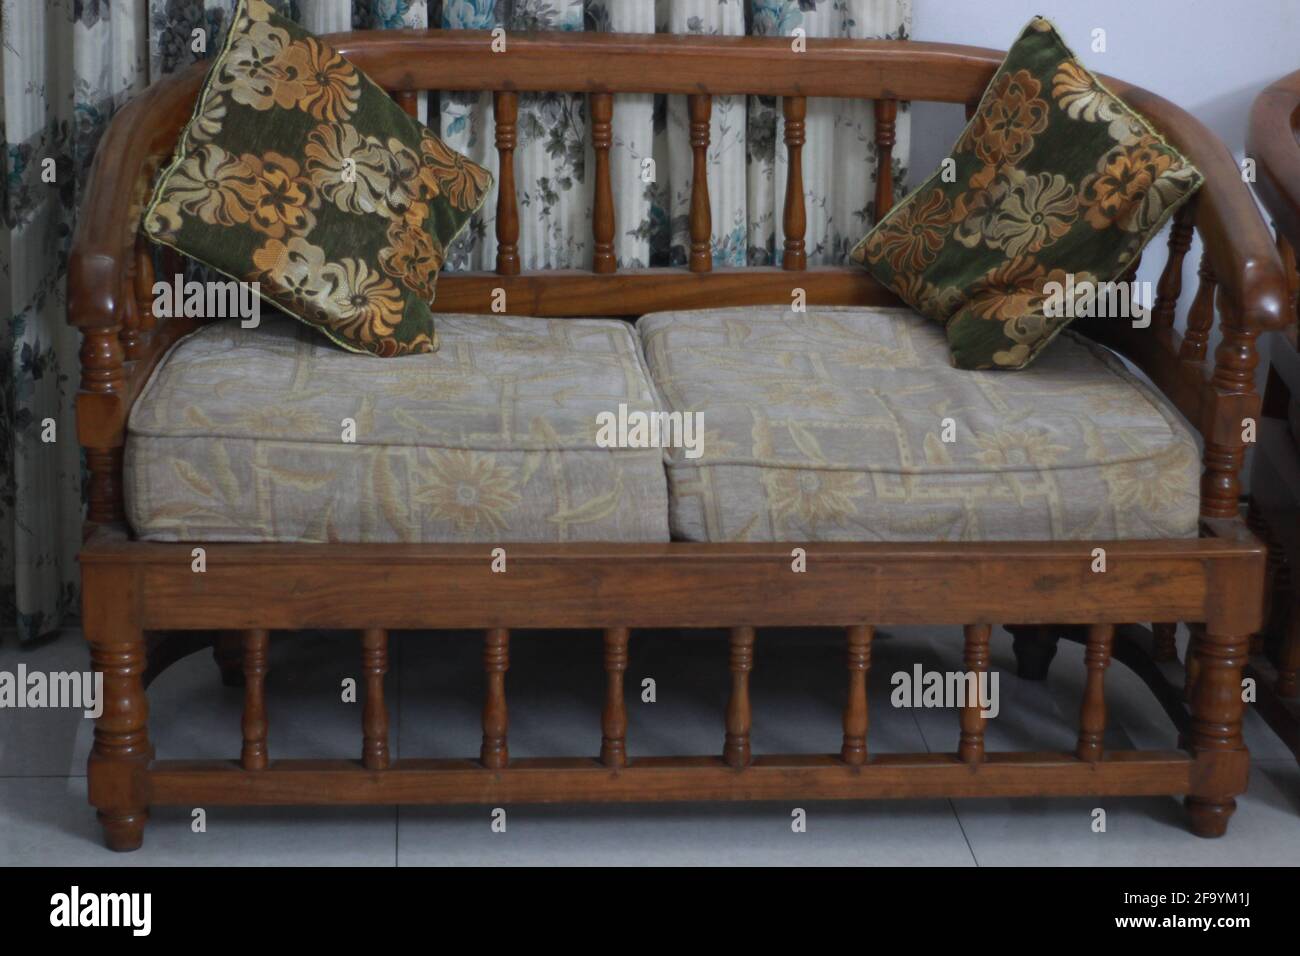 The beautiful old sofa in the room. Stock Photo